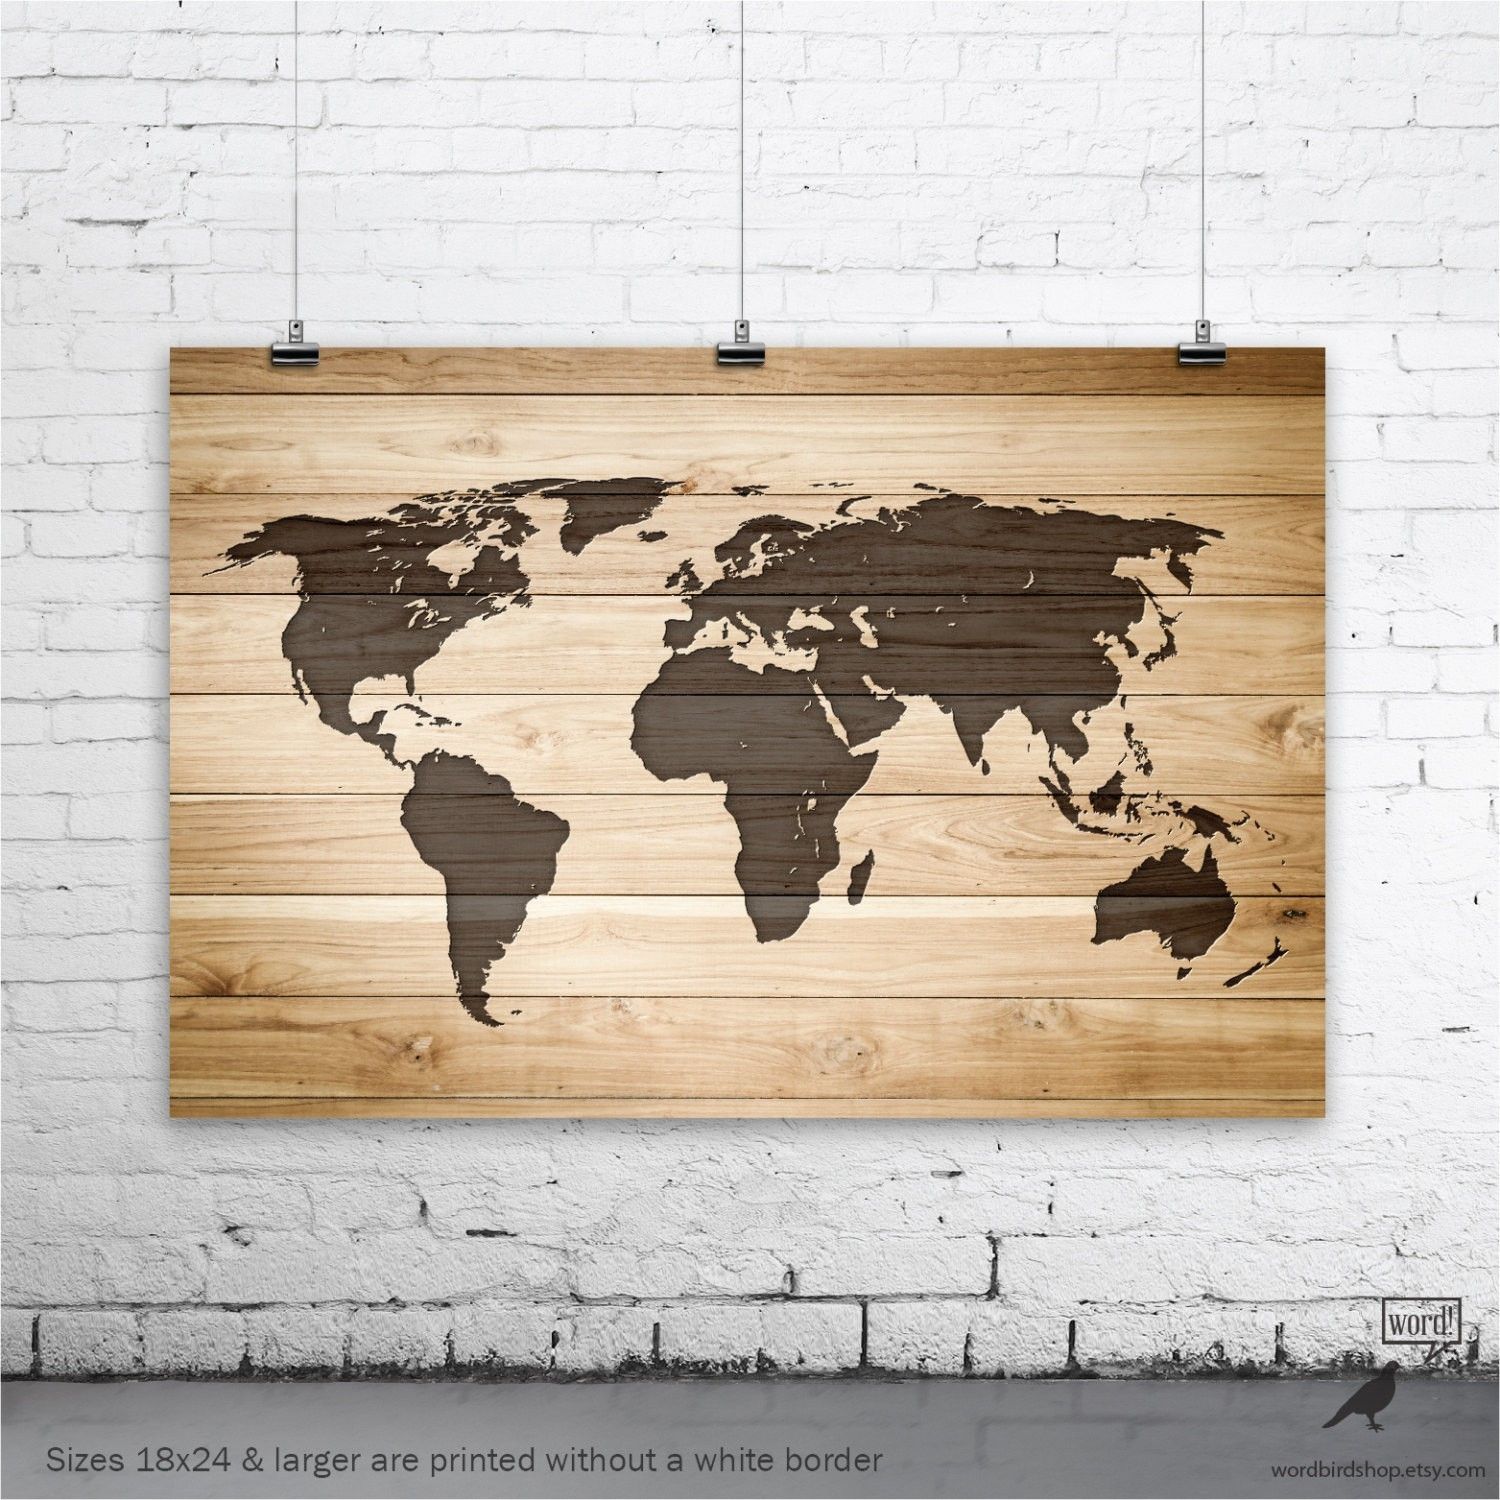 Wooden World Map Wall Decor New Living Room Magnificent Outstanding Throughout Wooden World Map Wall Art (View 19 of 20)